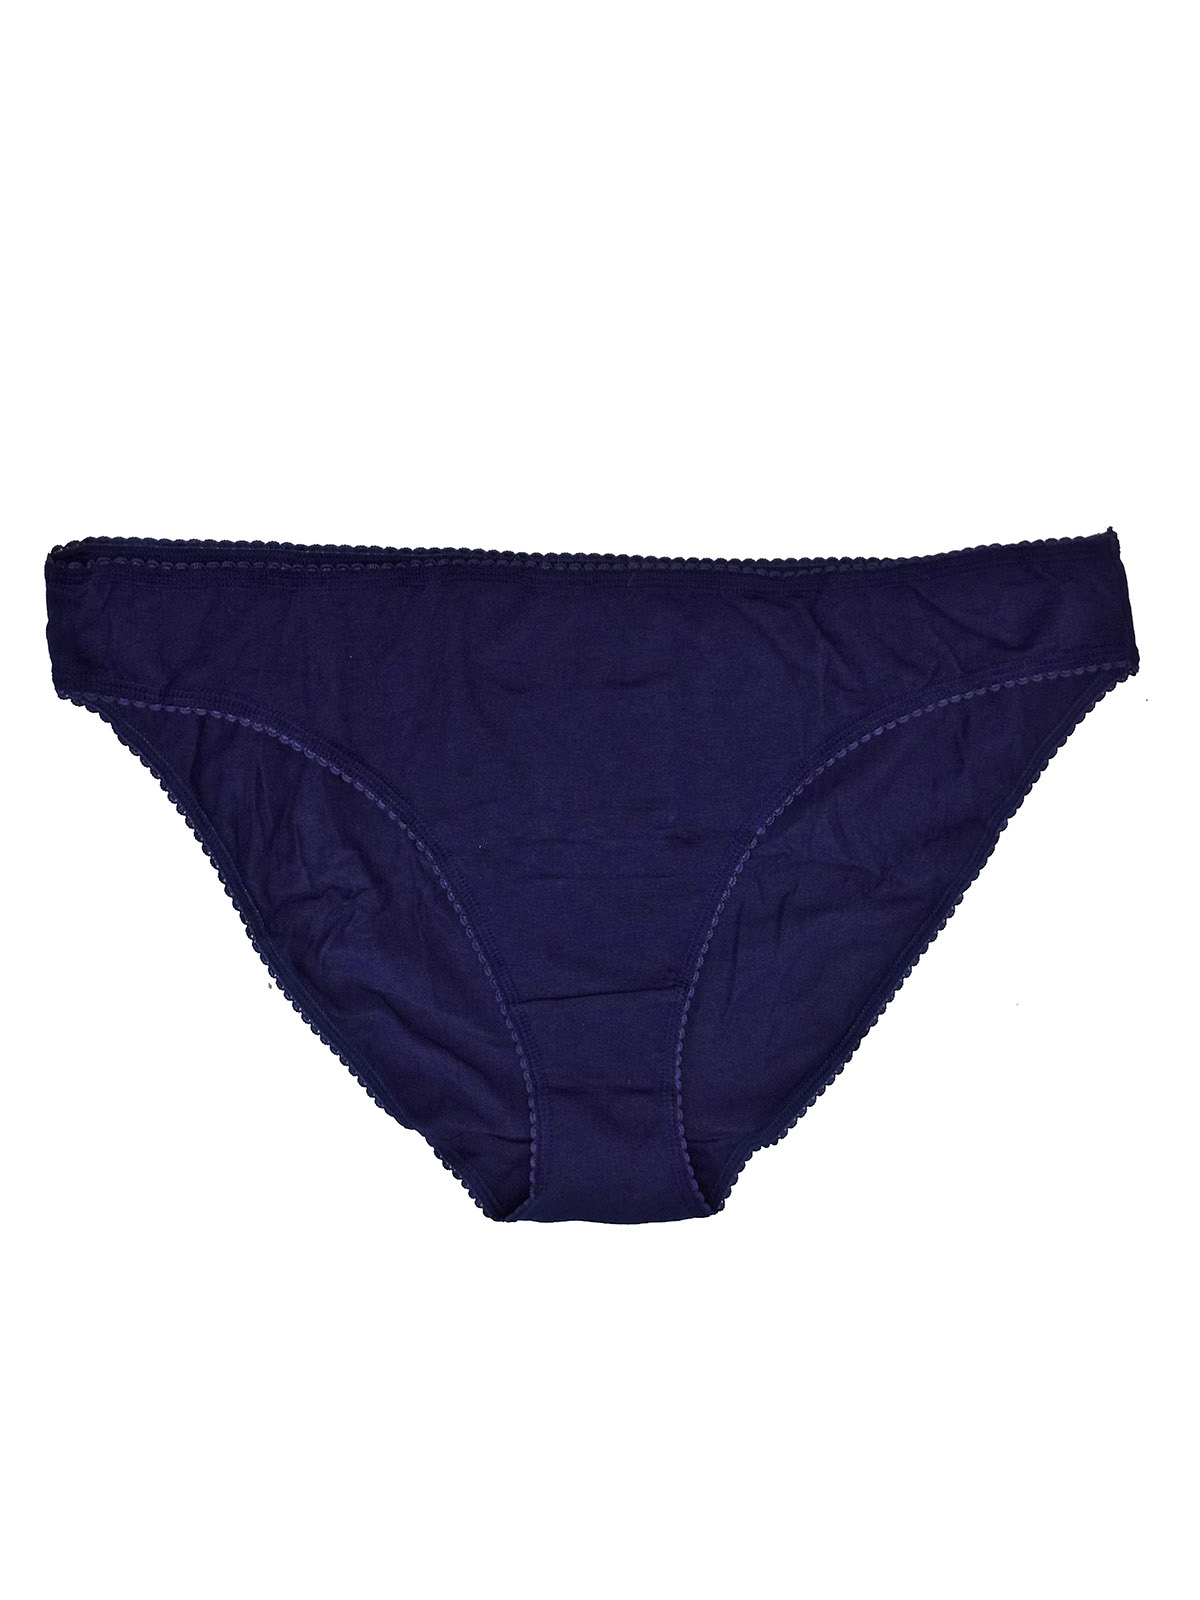 Marks and Spencer - - M&5 NAVY Cotton Rich Bikini Knickers - Plus Size ...